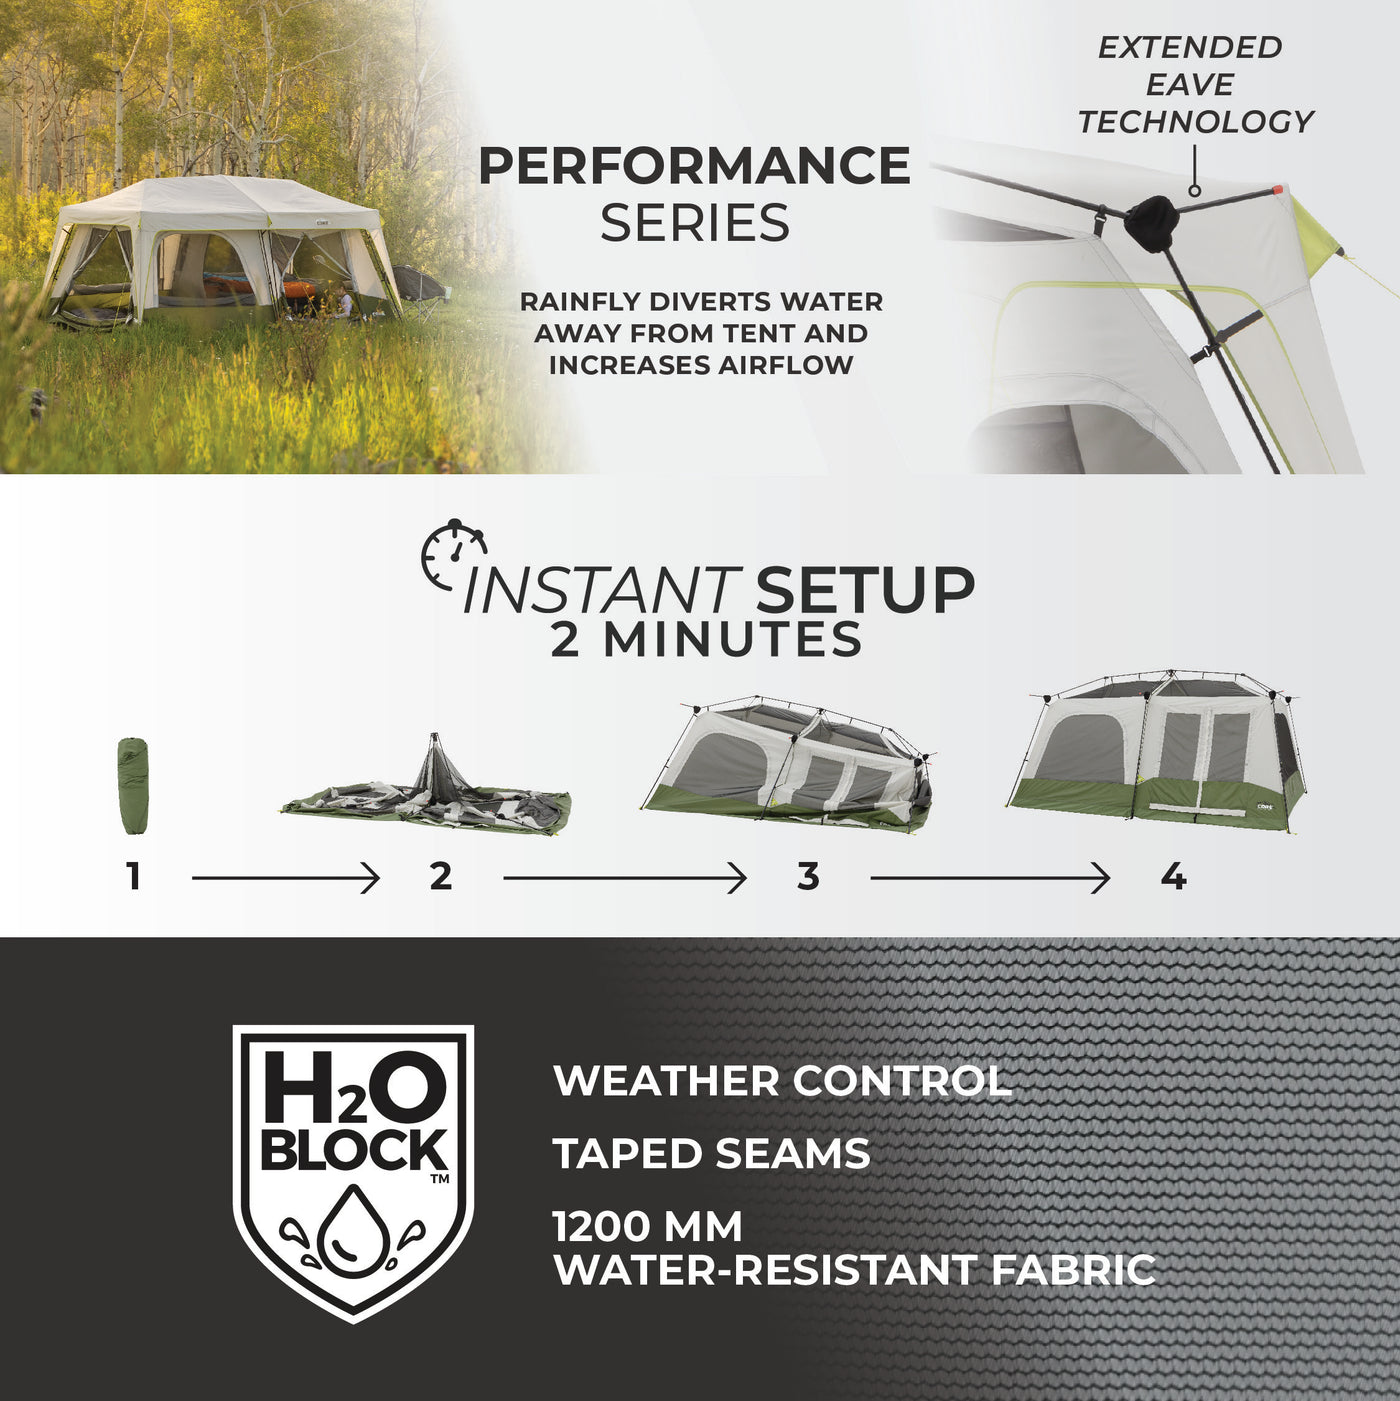 Core Equipment Performance 10 Person Instant Cabin Tent